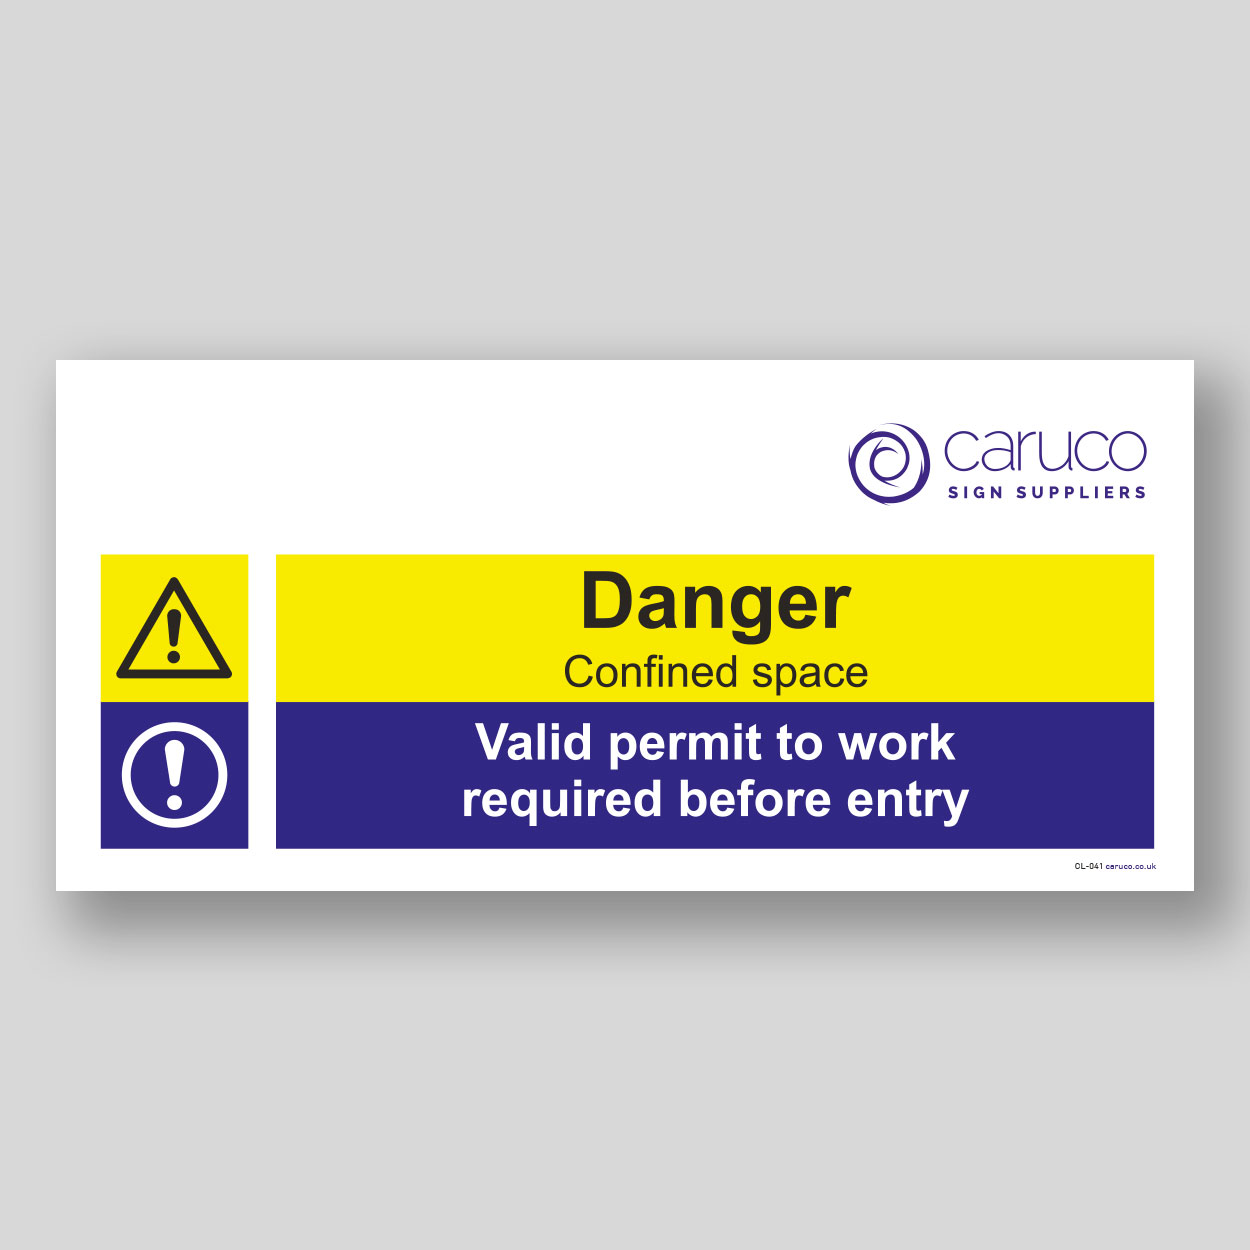 CL-041 Danger confined space - valid permit